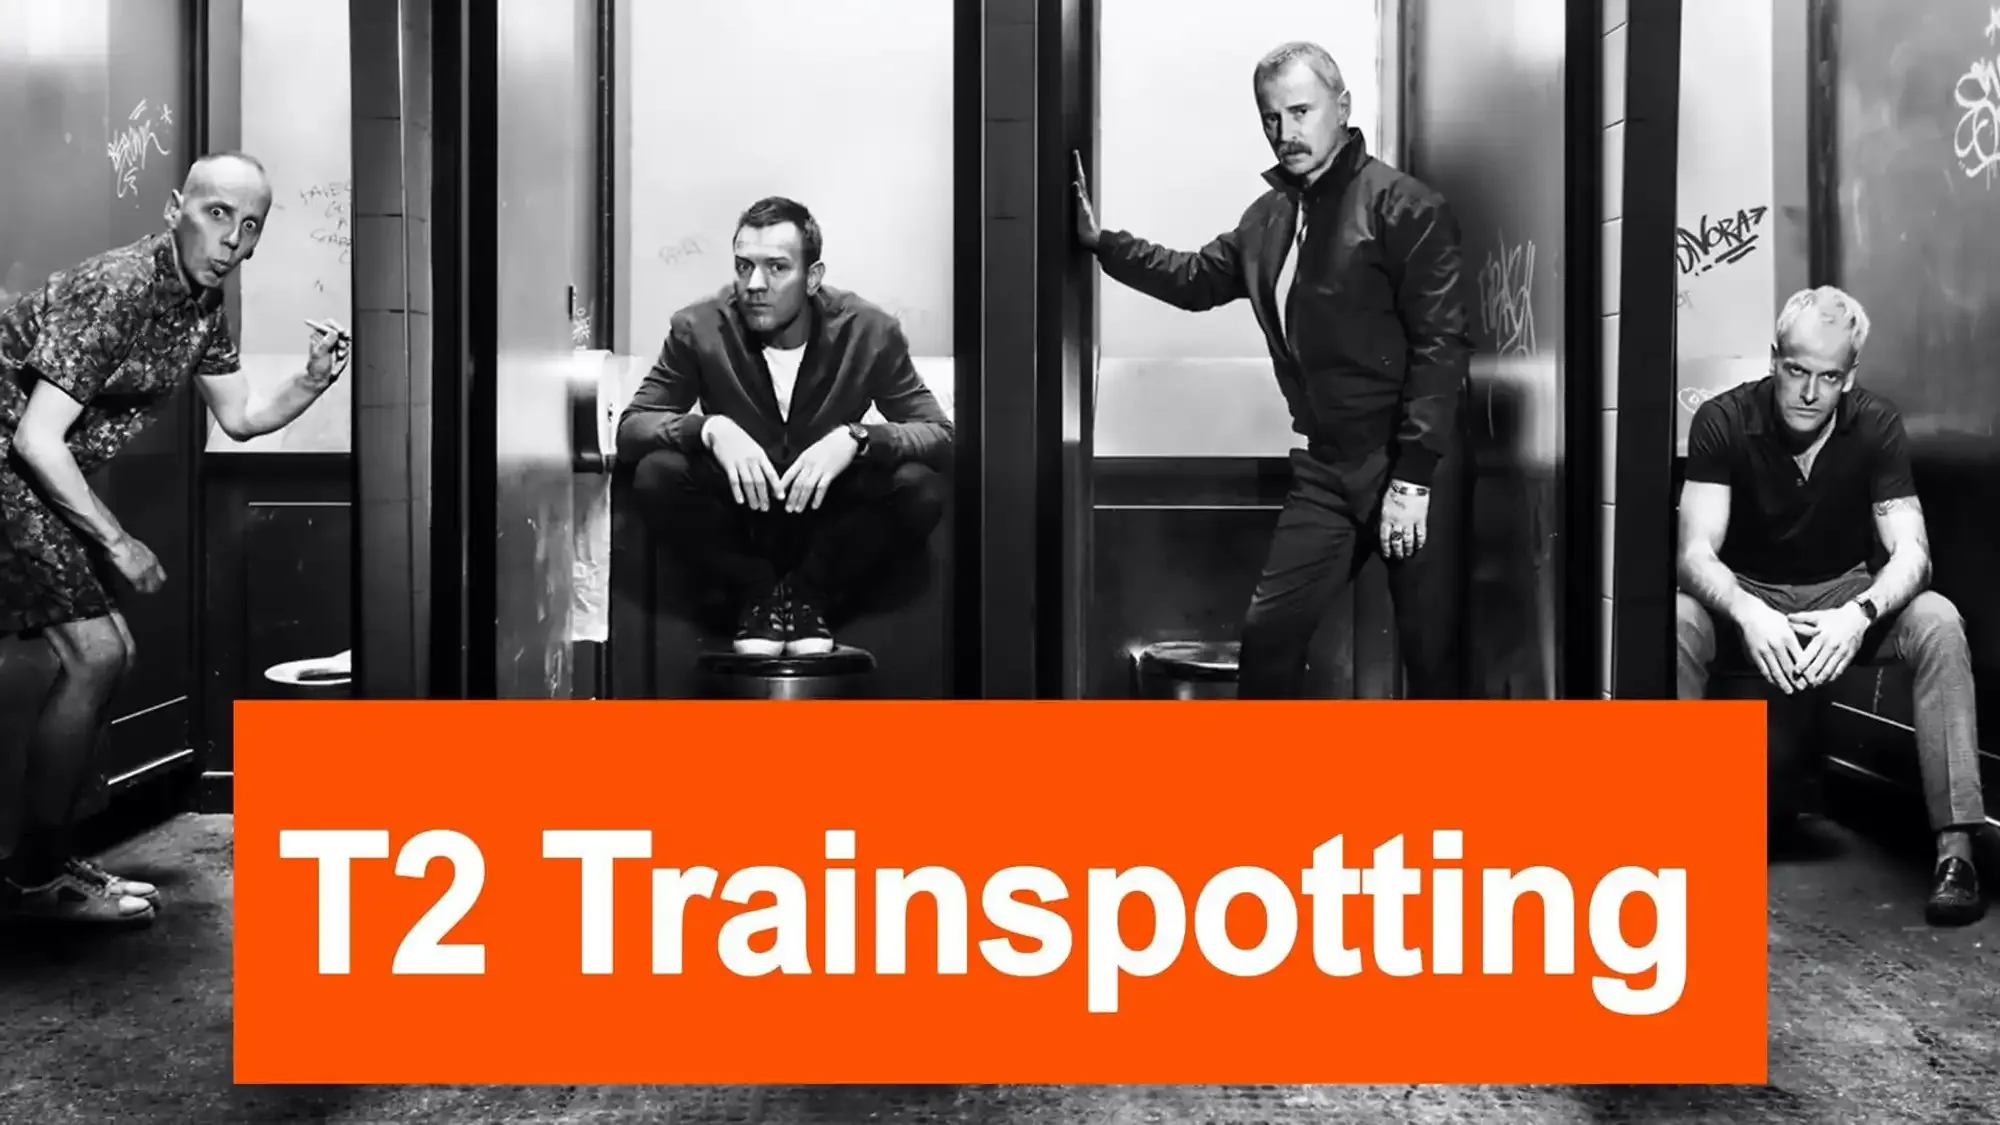 T2 Trainspotting movie review